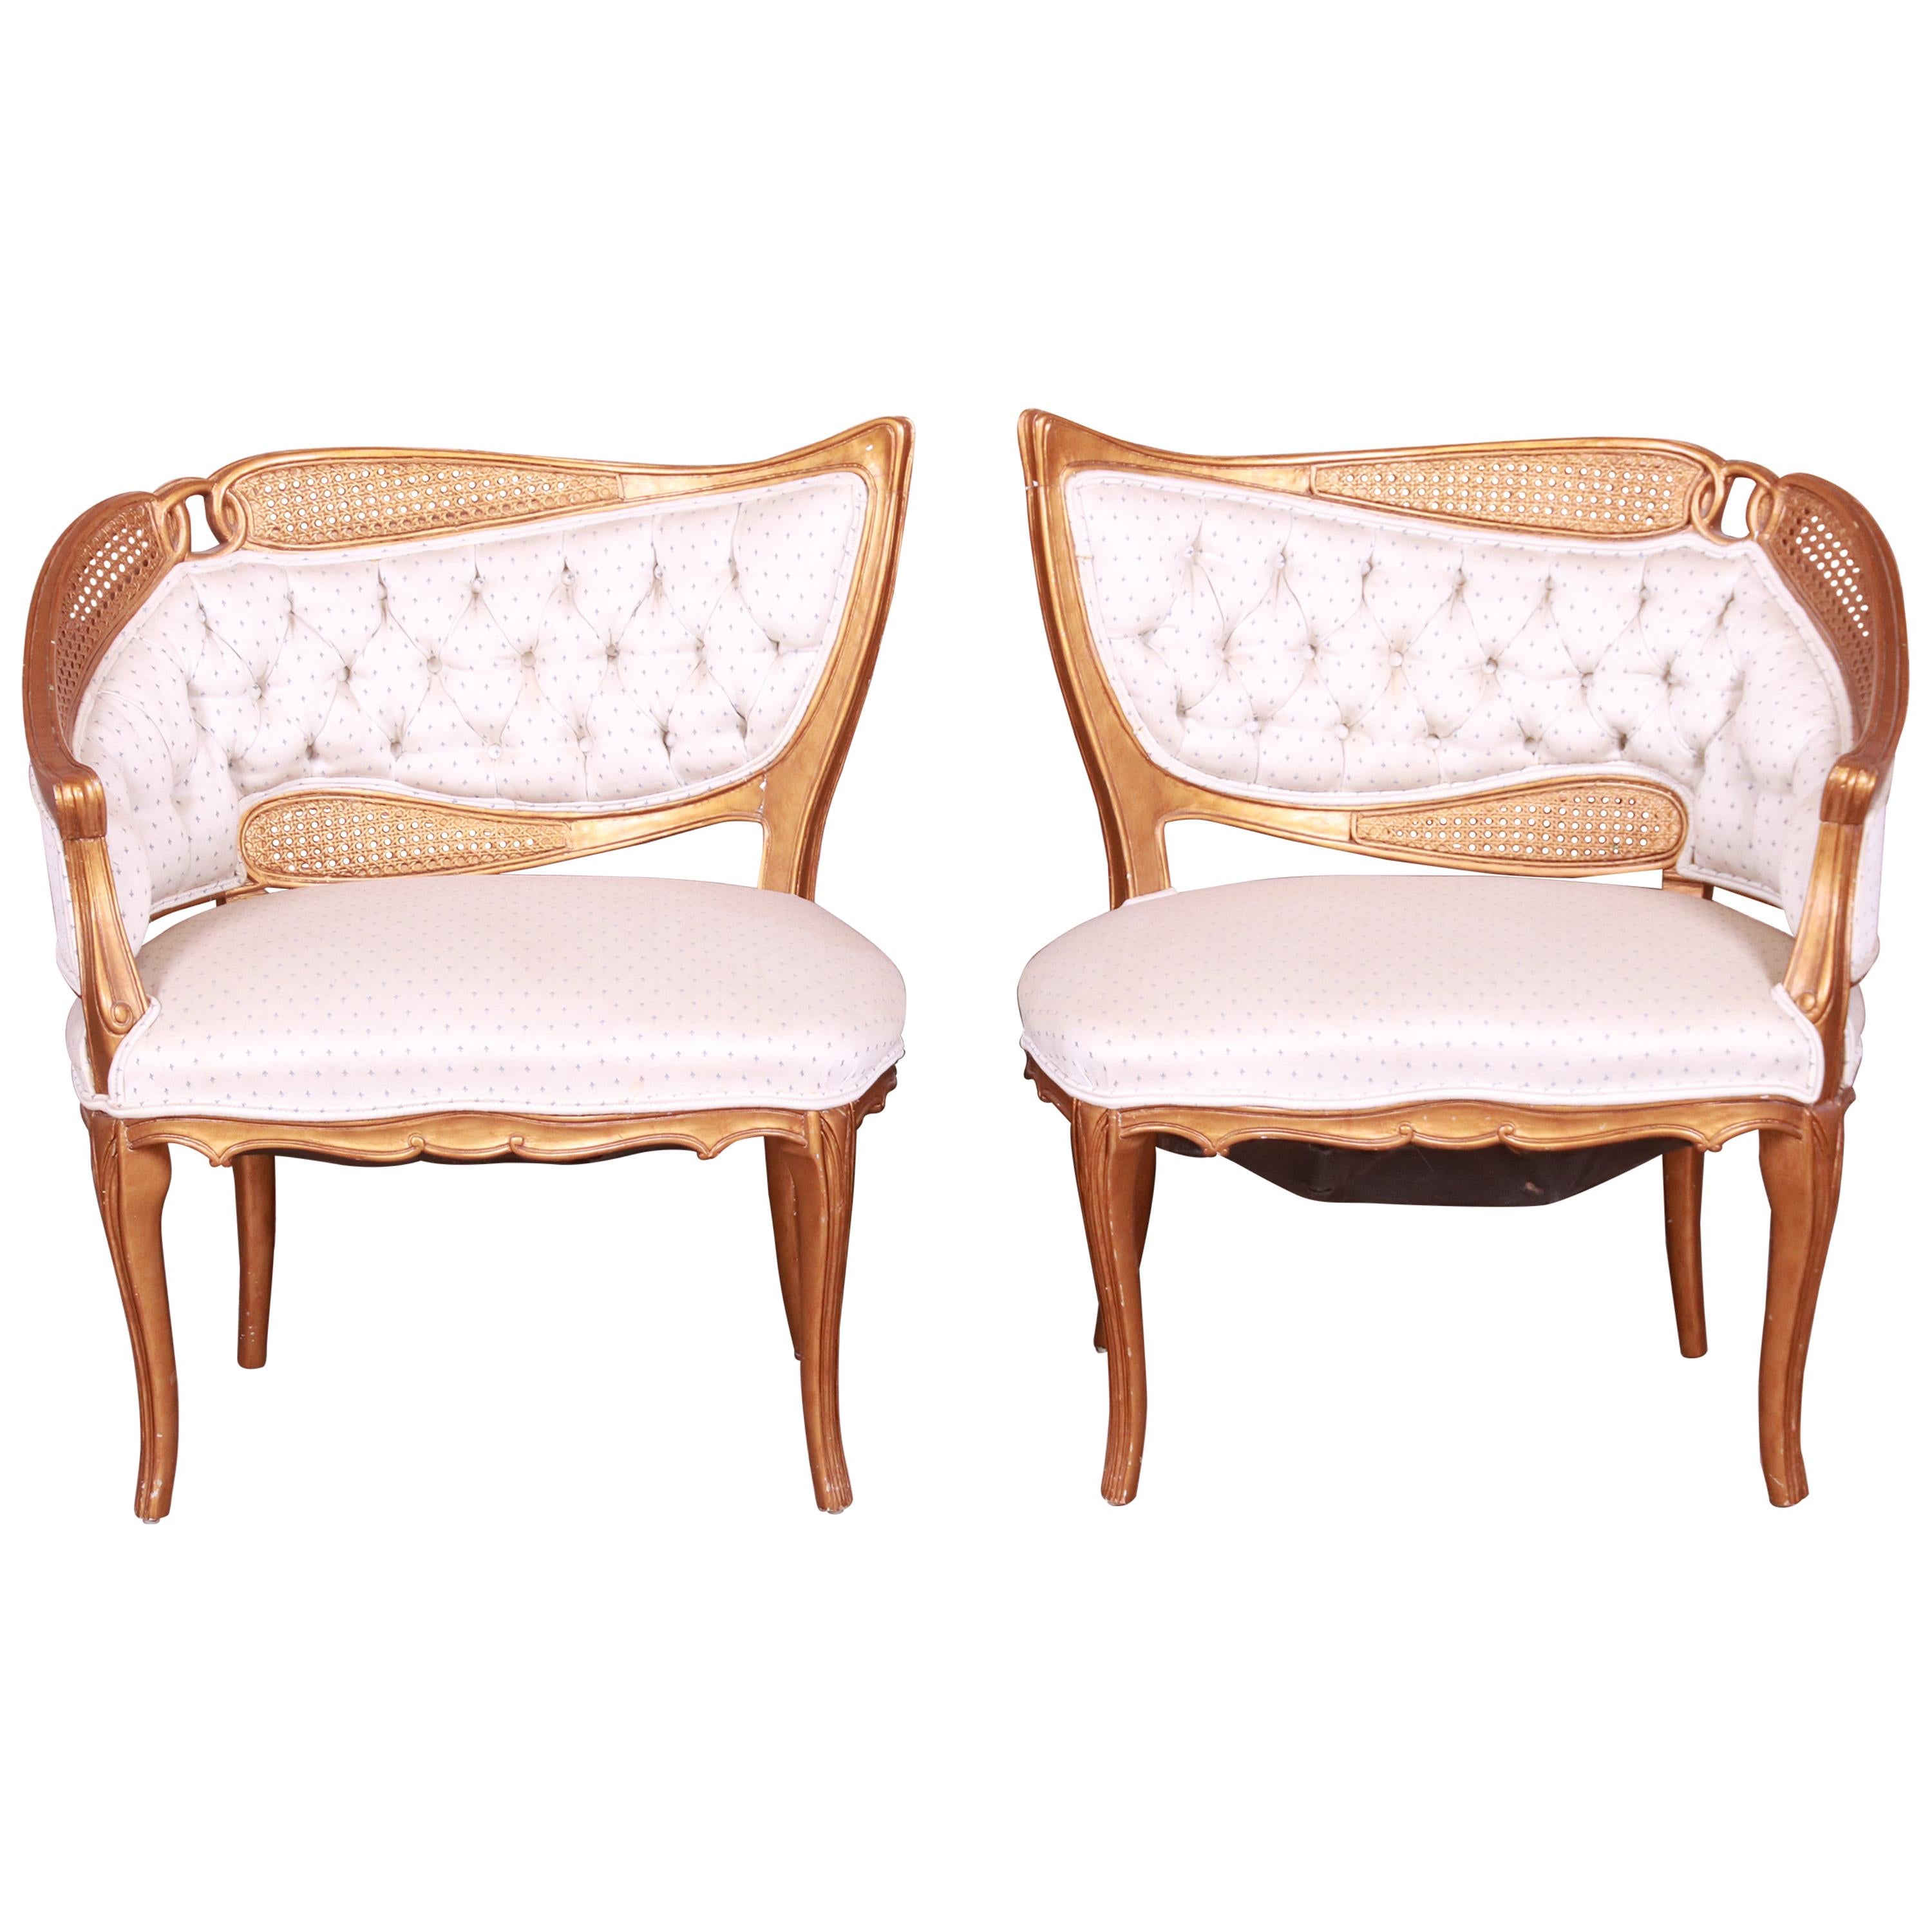 French Rococo Louis XV Giltwood and Cane Upholstered Fireside Chairs, Pair